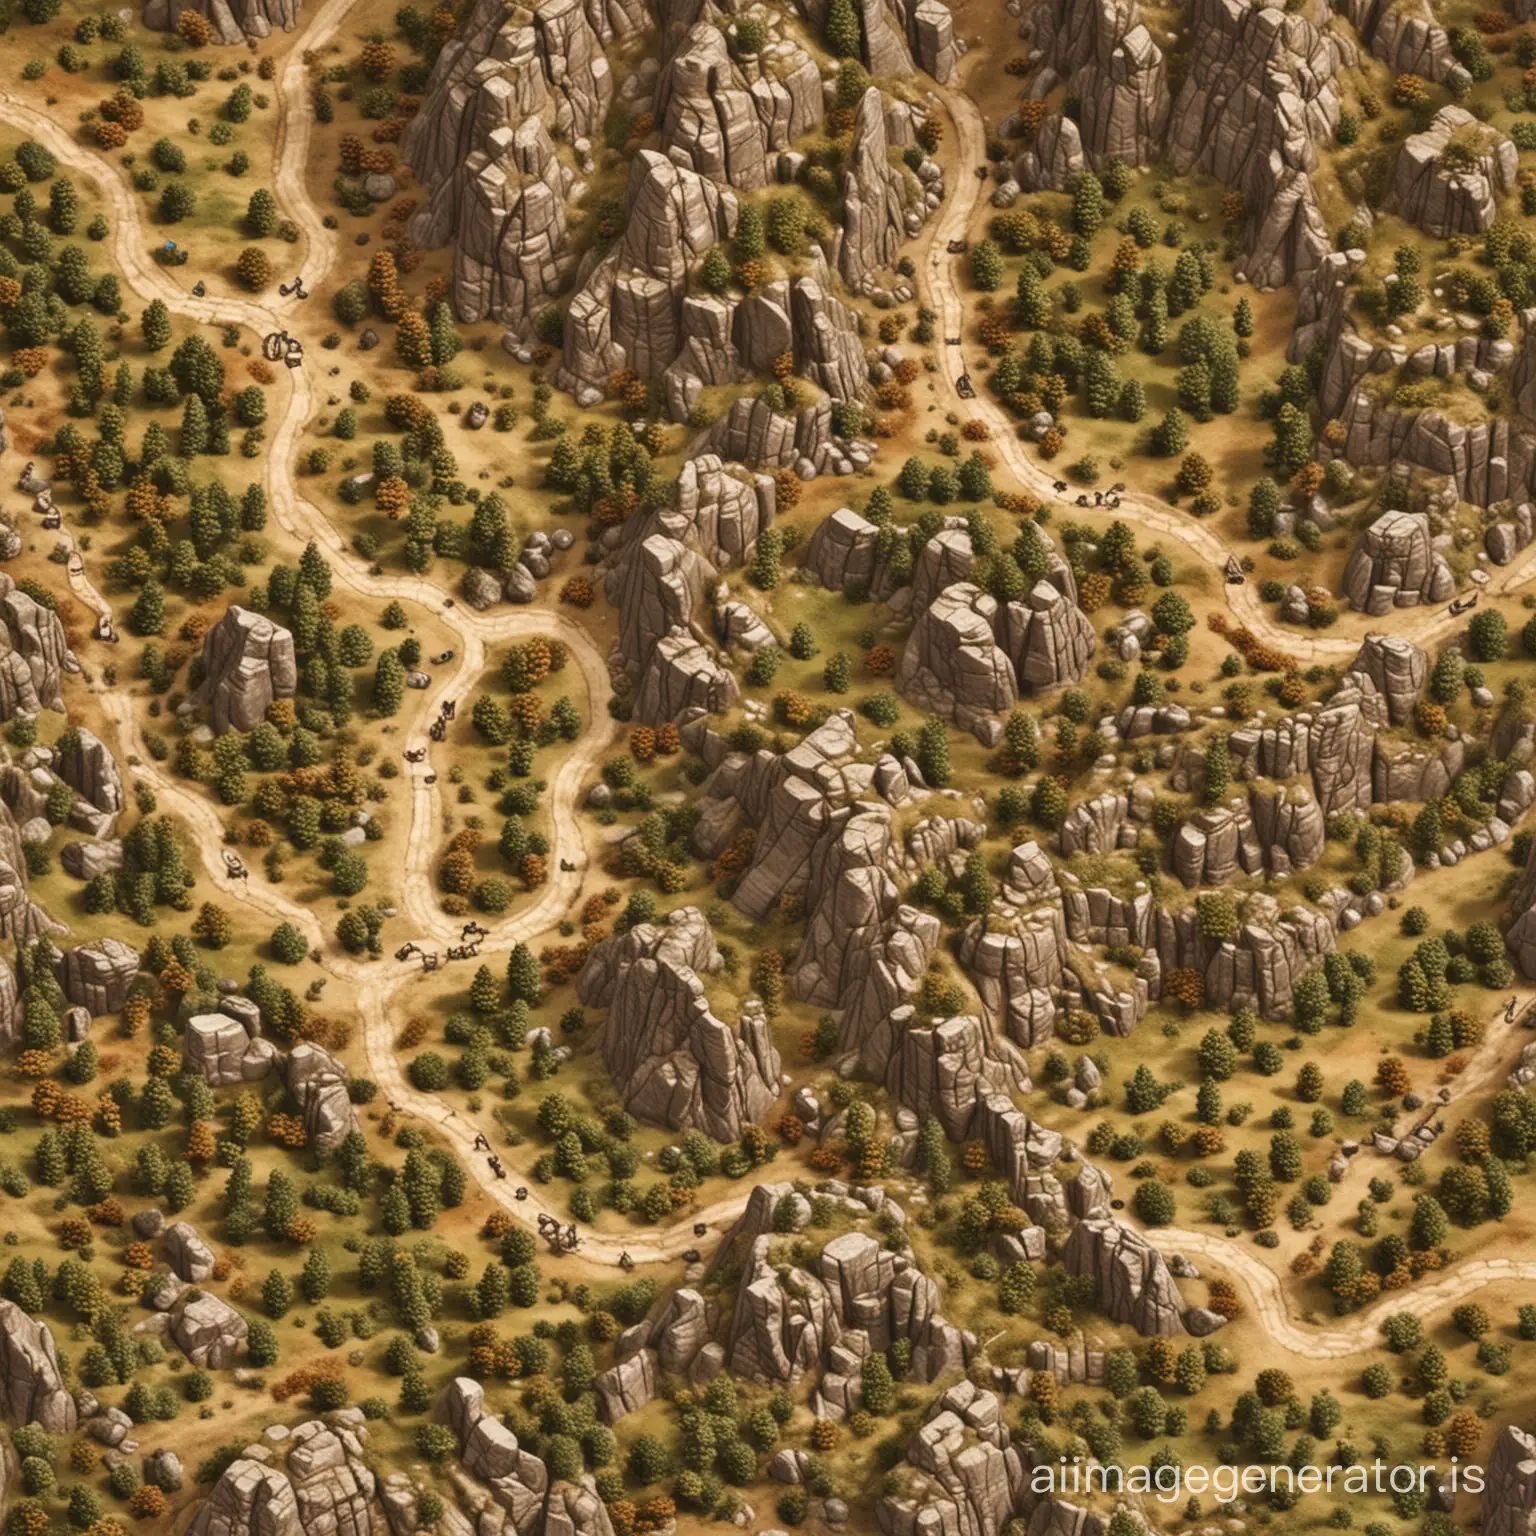 TTRPG-Battle-Map-Mountain-Terrain-with-Rustic-Canyon-Path